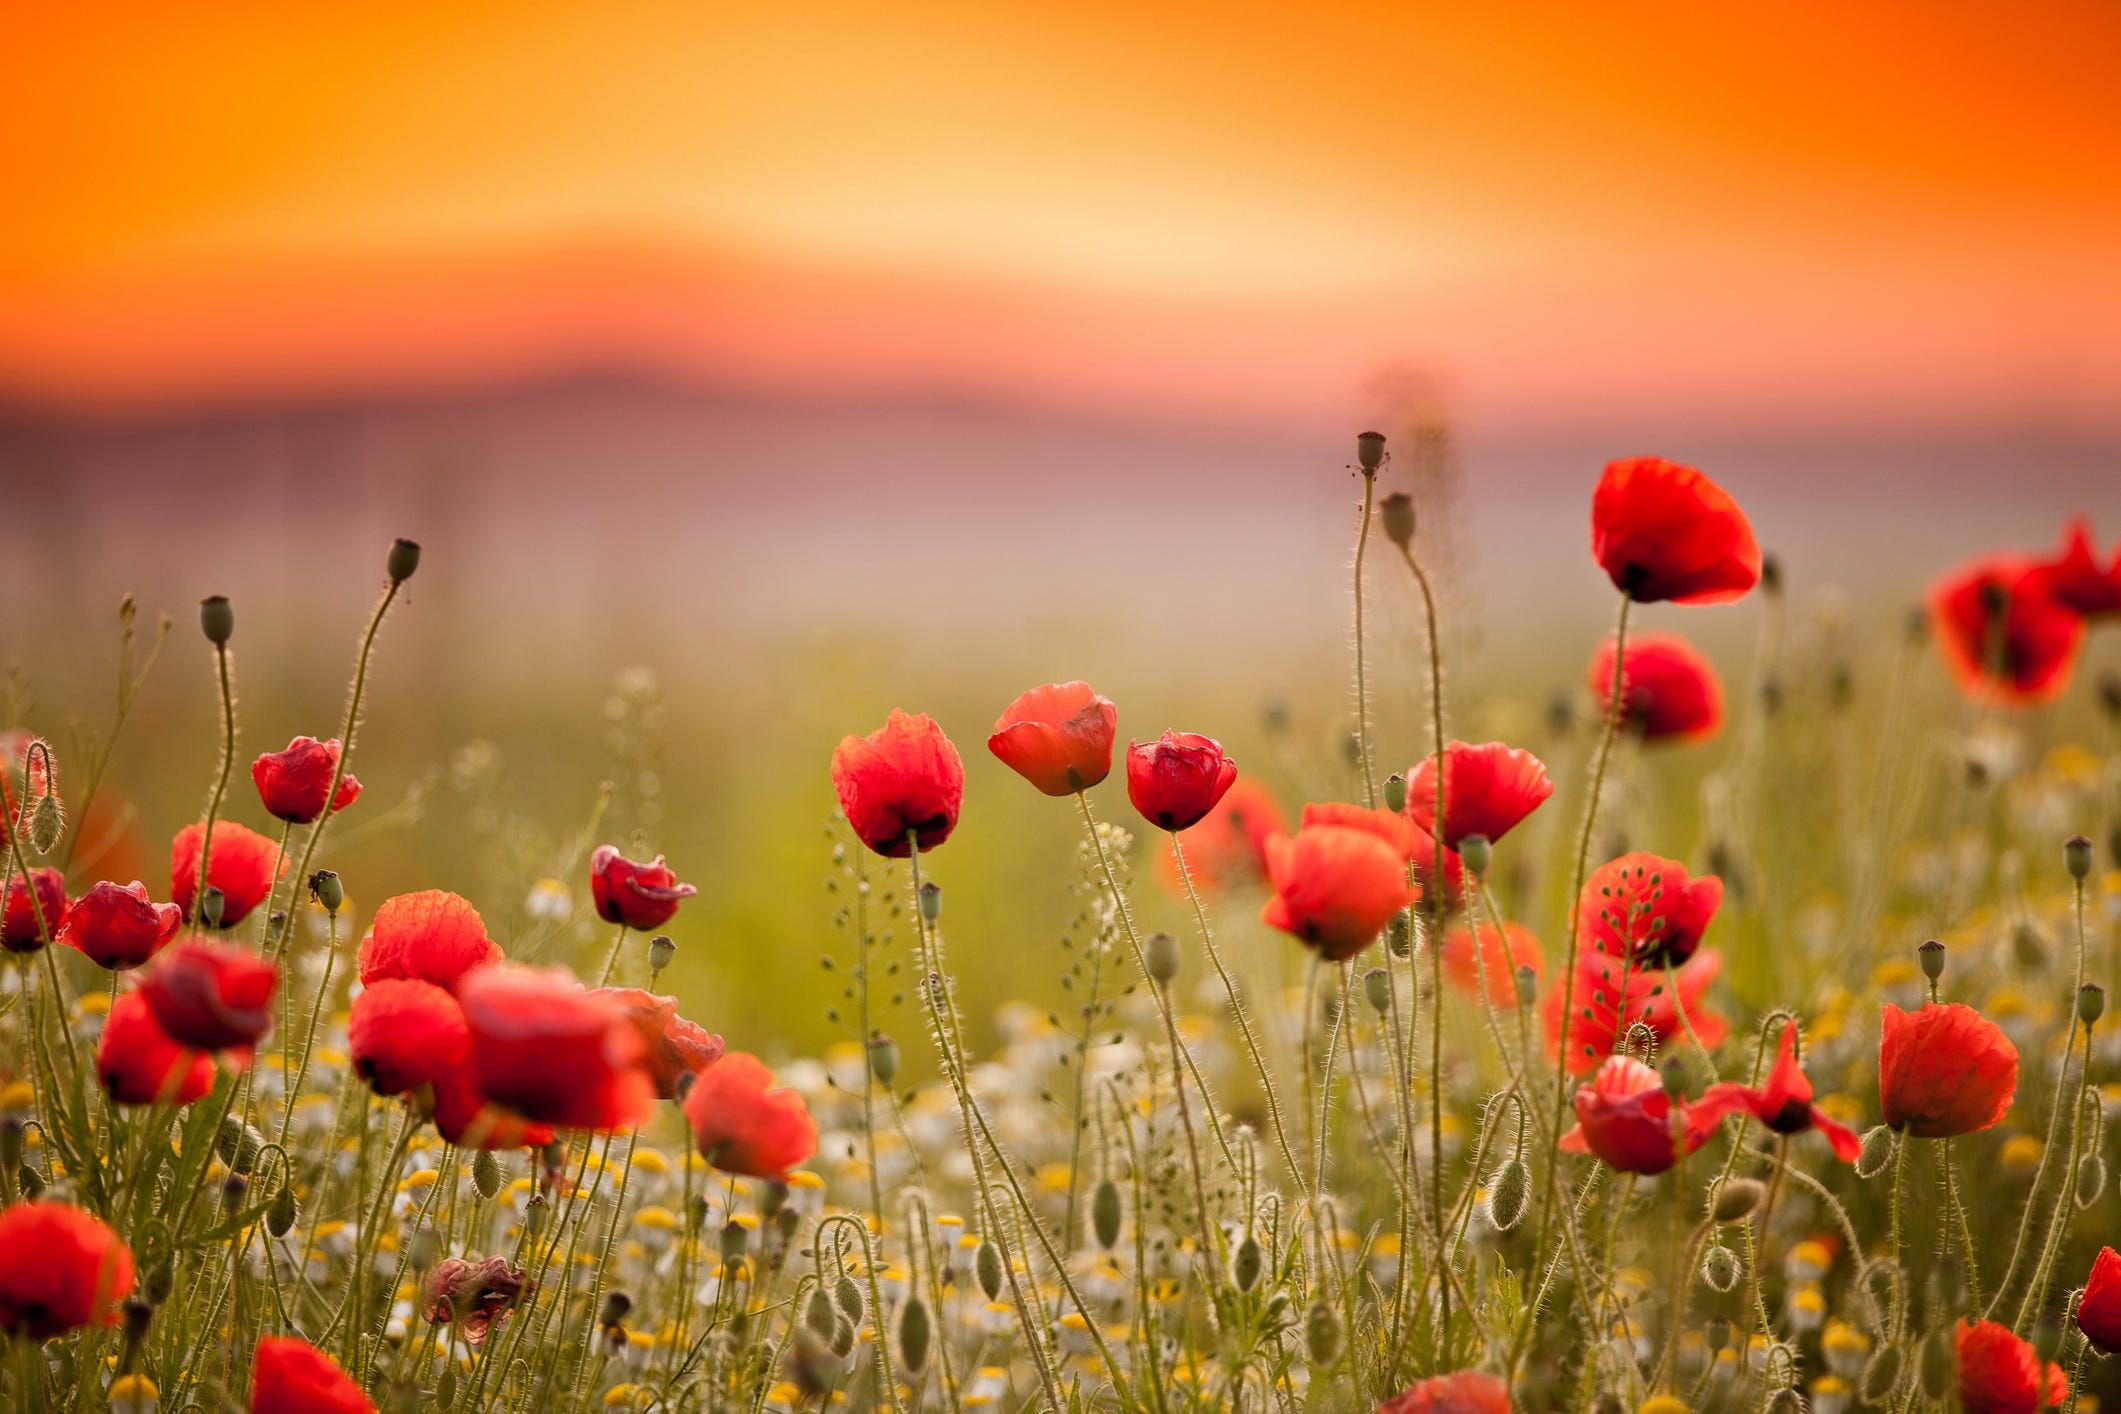 Memorial Day: Poppies and Smiles for Freedom